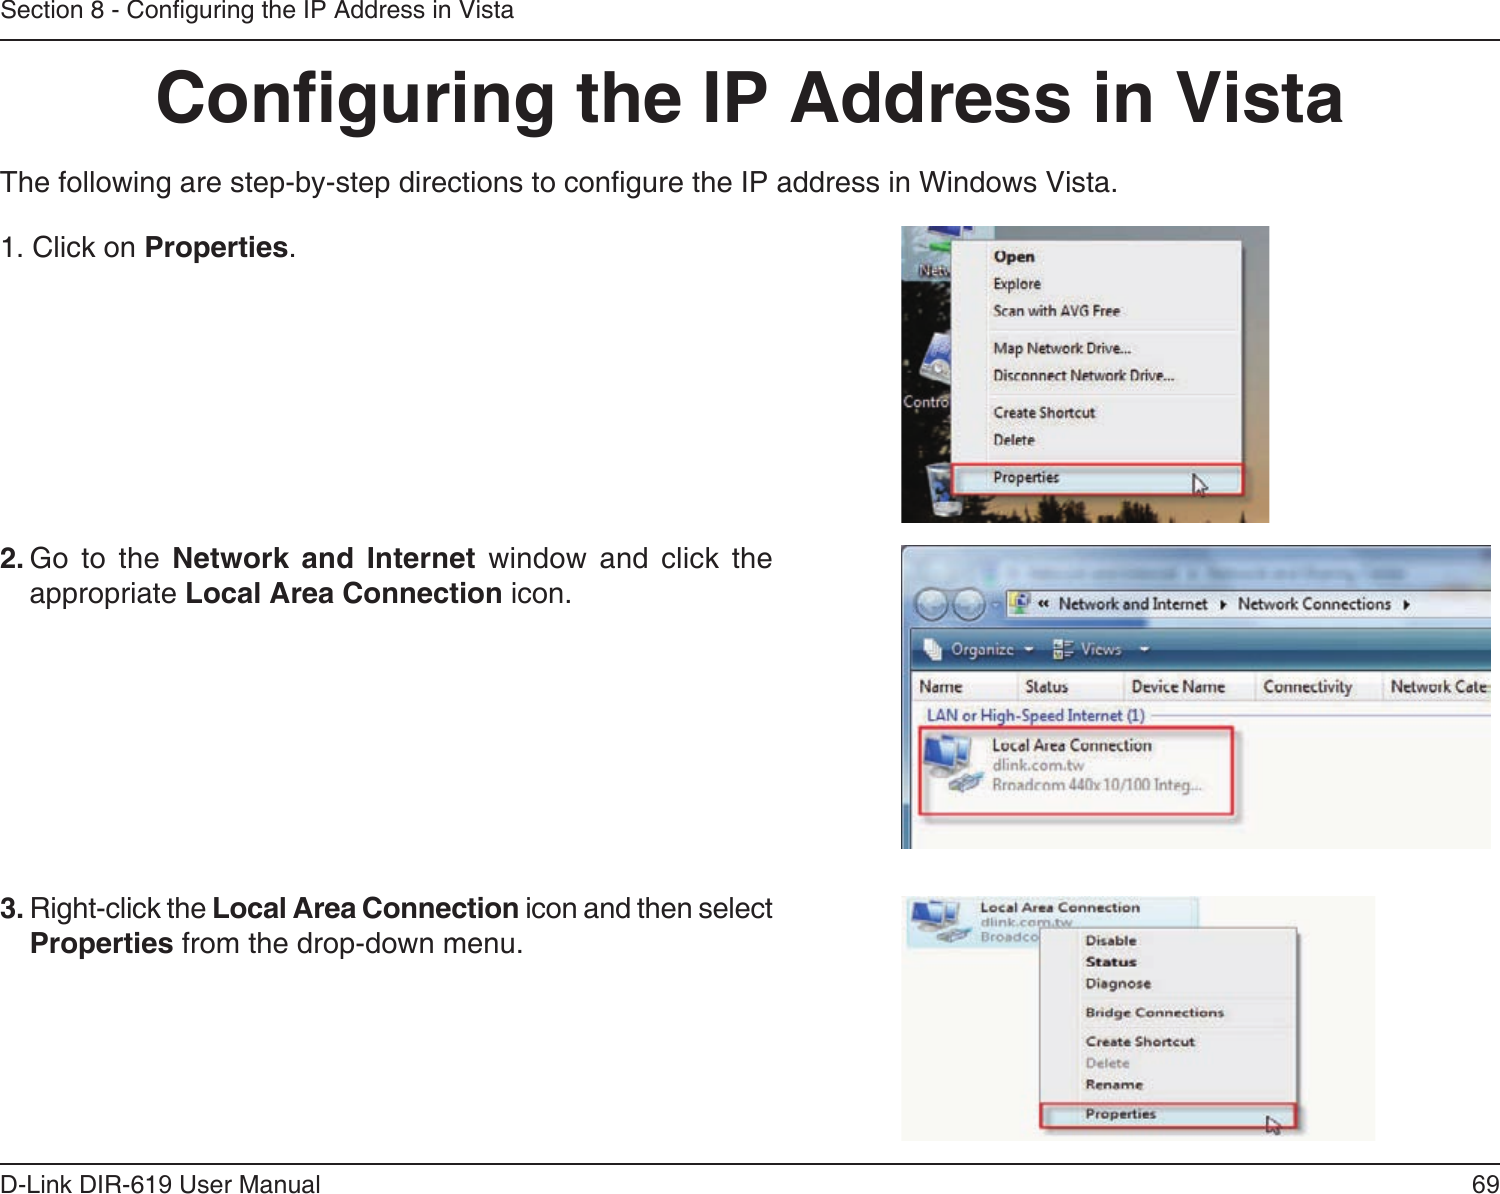 69D-Link DIR-619 User ManualSection 8 - Conguring the IP Address in VistaConguring the IP Address in VistaThe following are step-by-step directions to congure the IP address in Windows Vista.      2. Go  to  the  Network and Internet  window  and  click  the appropriate Local Area Connection icon. 1. Click on Properties.3. Right-click the Local Area Connection icon and then select Properties from the drop-down menu. 